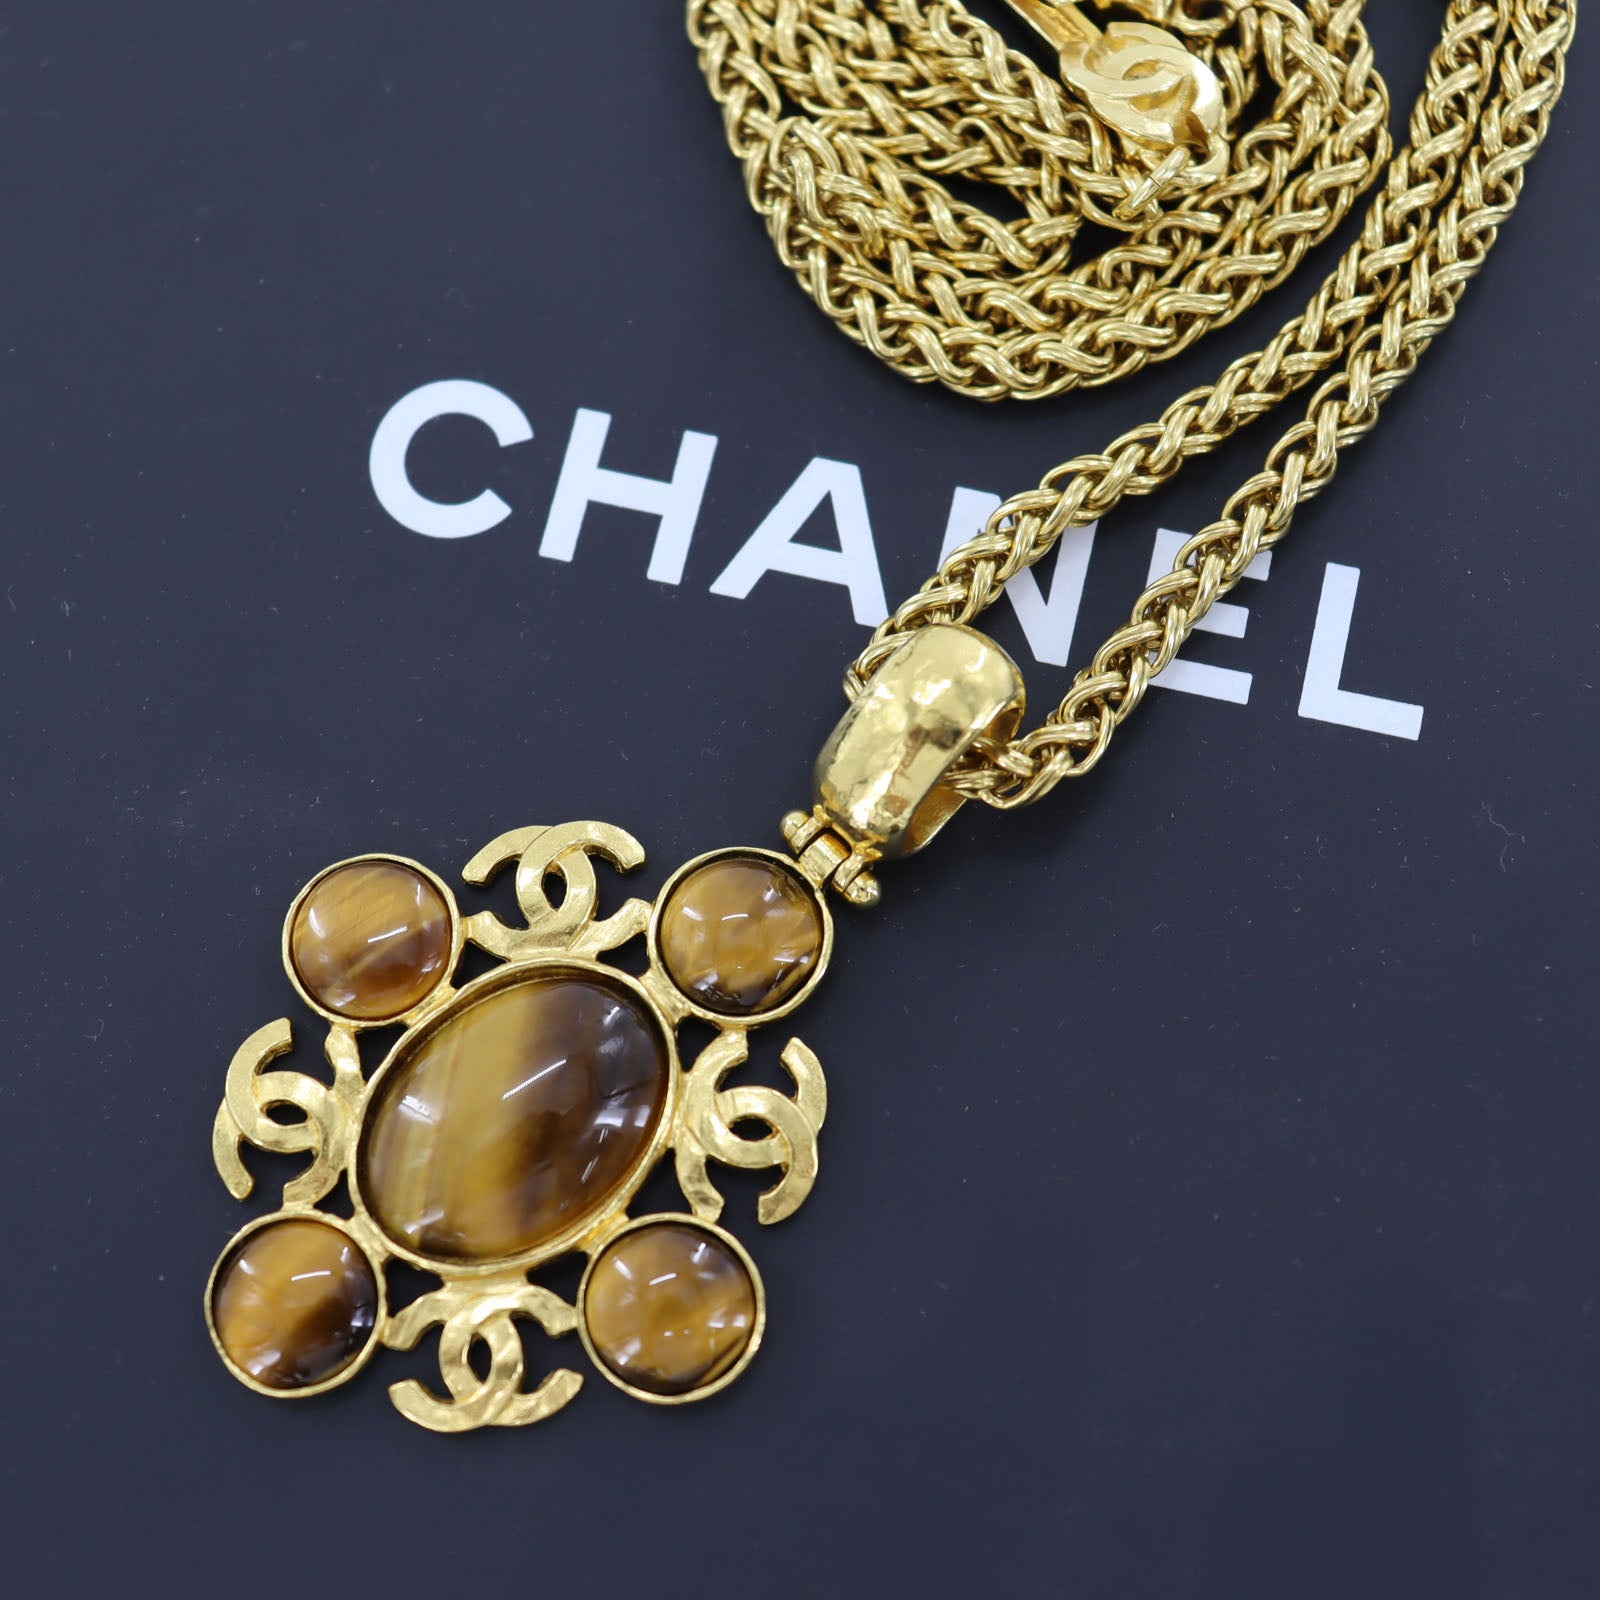 CHANEL Logo Used Necklace Gold Plated Chain Stone 95 A France